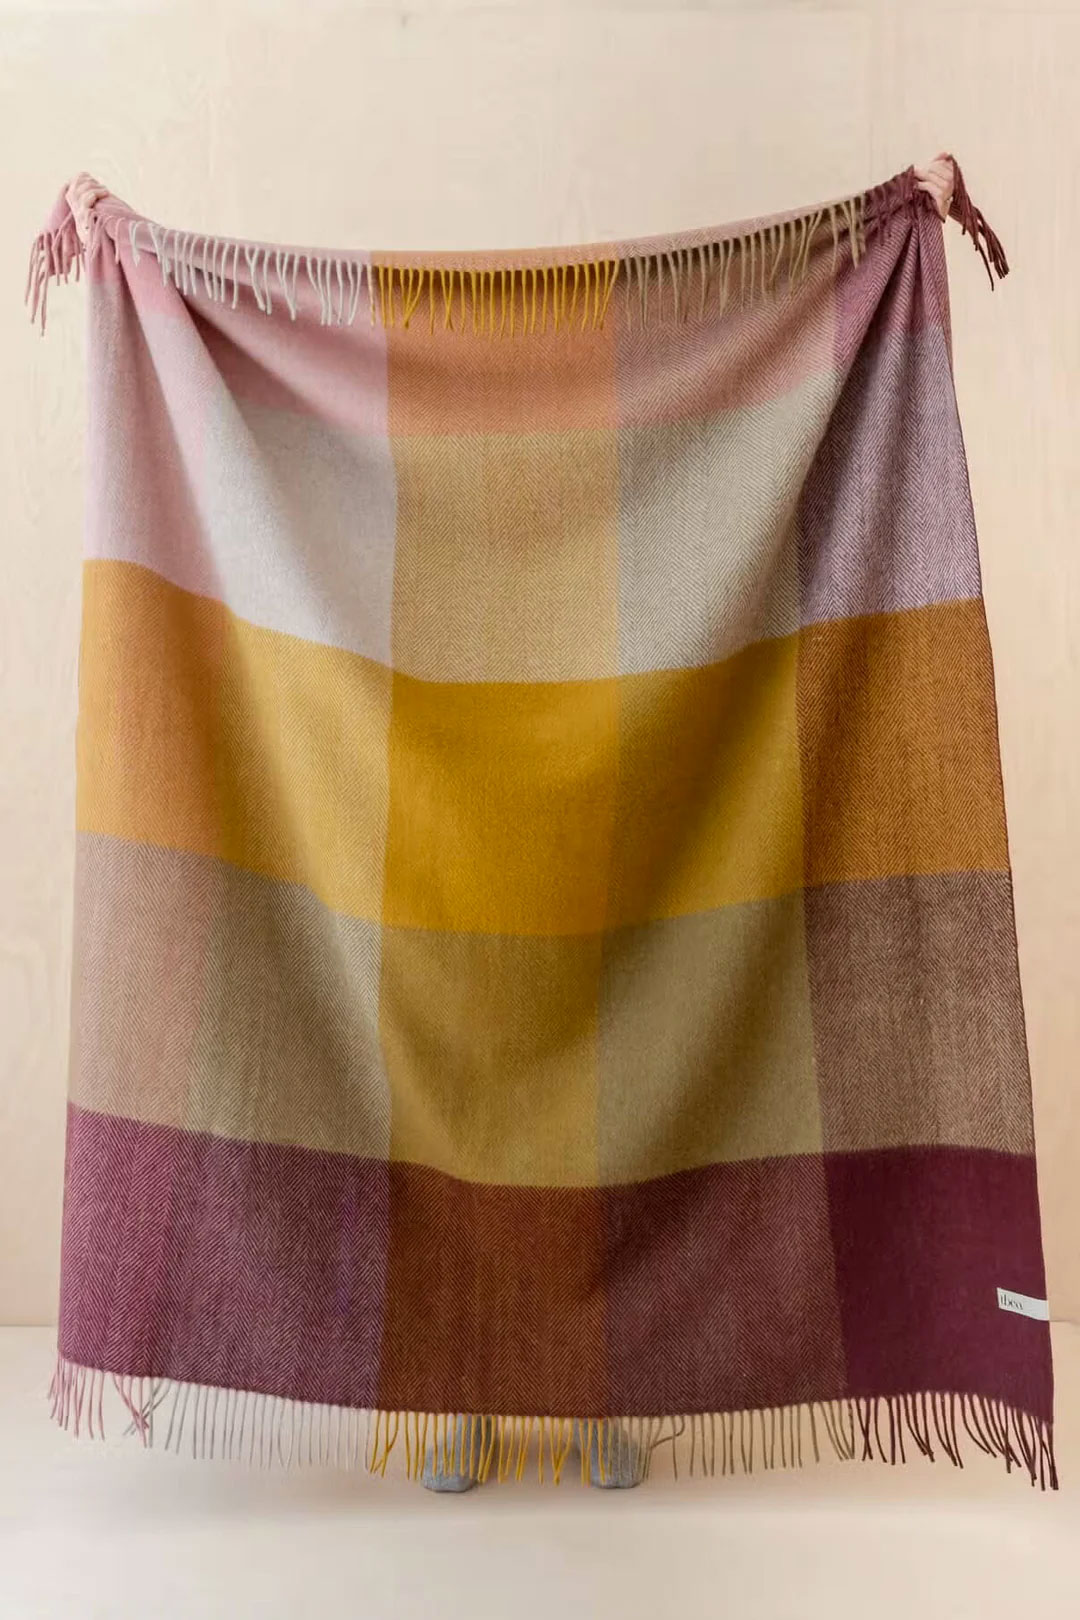 tbco recycled wool blanket in fall colors from wallflower